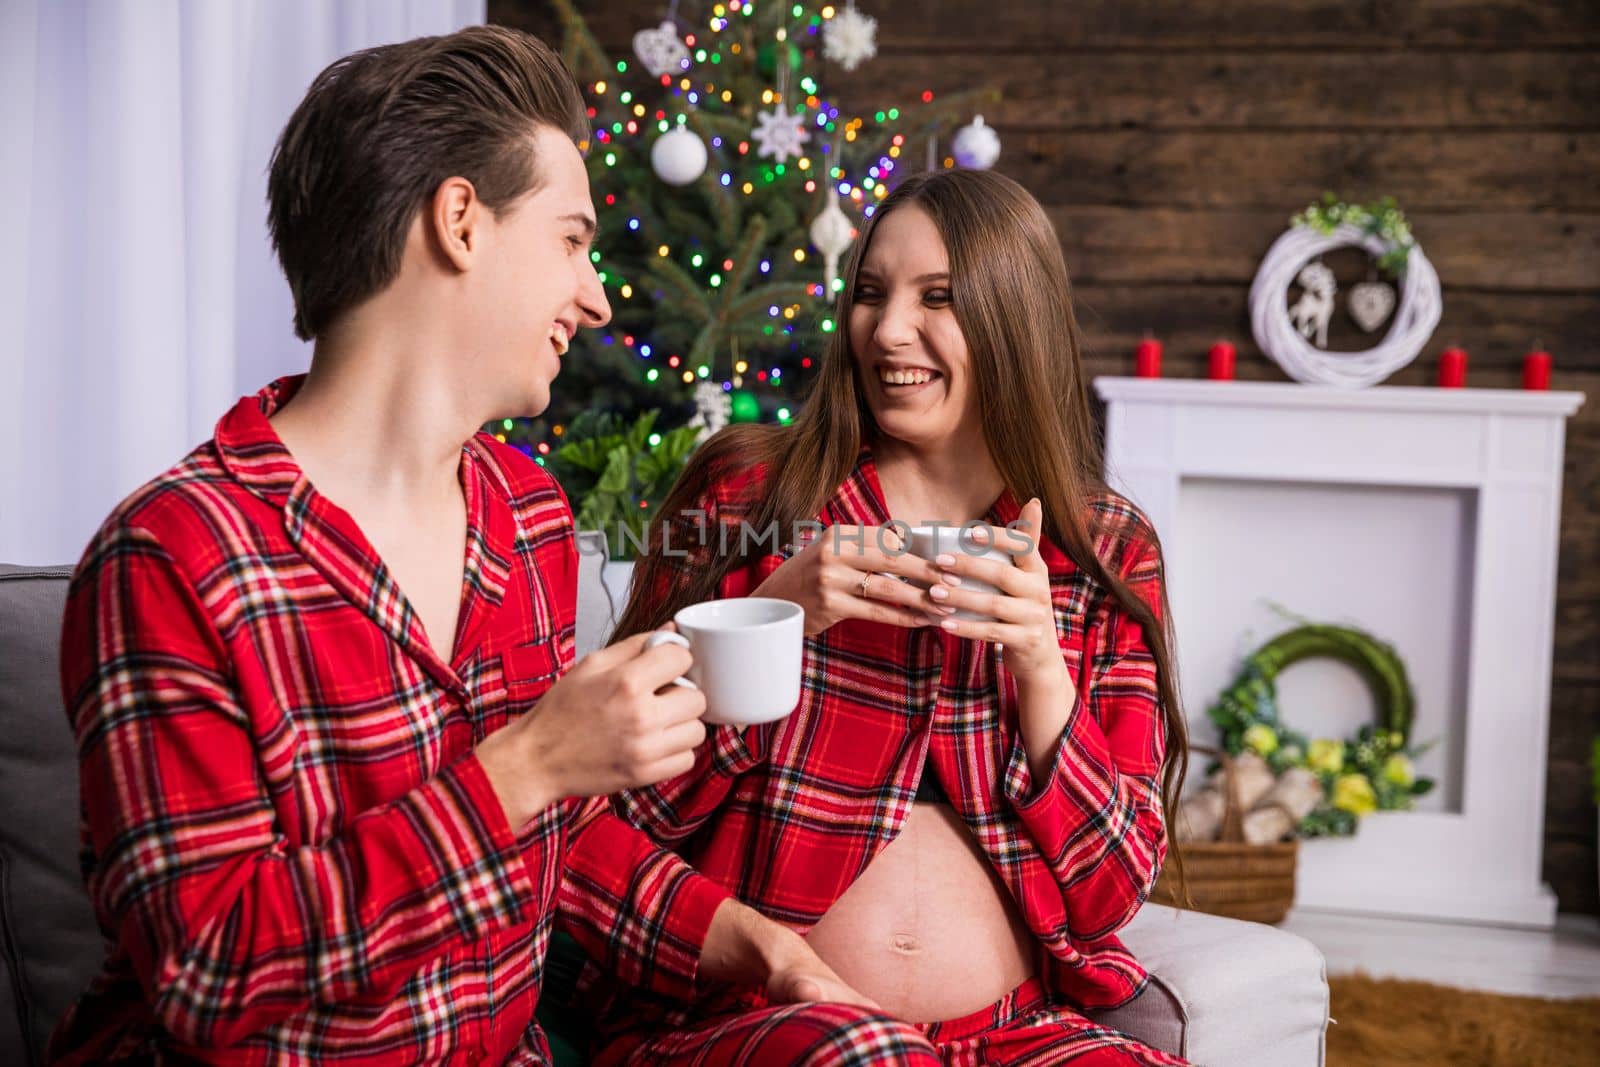 A man and a woman with advanced pregnancy sit on a couch against the background of a Christmas tree. The couple is holding white teacups in their hands. Both are facing each other, they are cheerful and laughing.